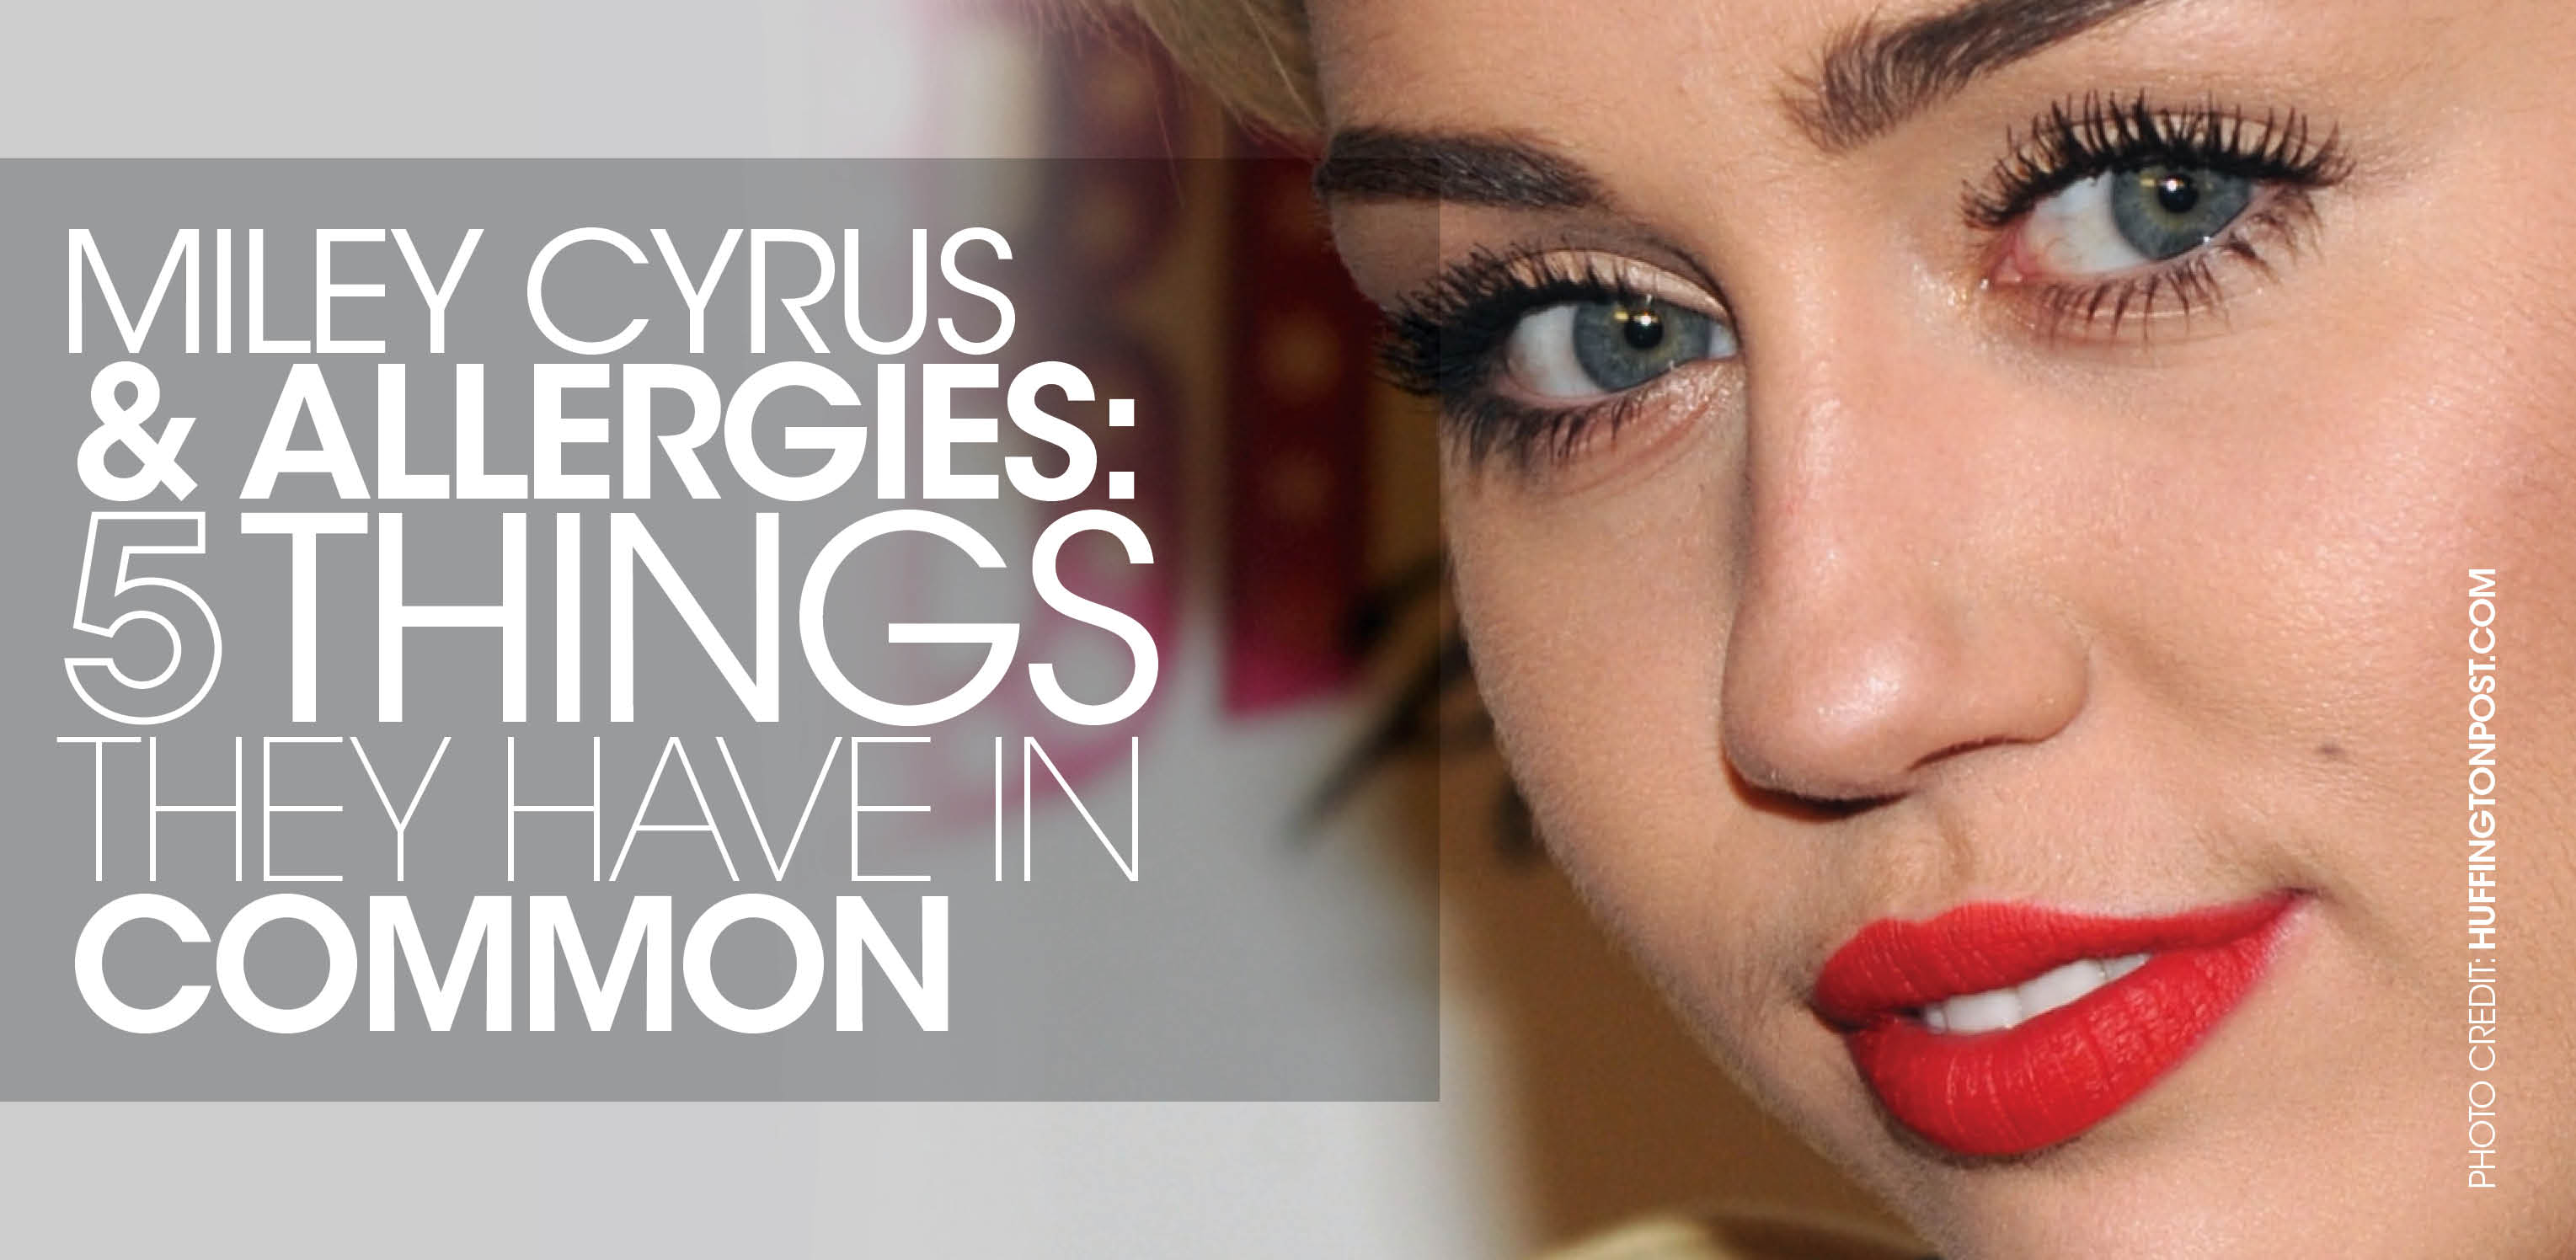 Blog title "Miley Cyrus & Allergies: 5 things they have in common" superimposed over Miley Cyrus' face